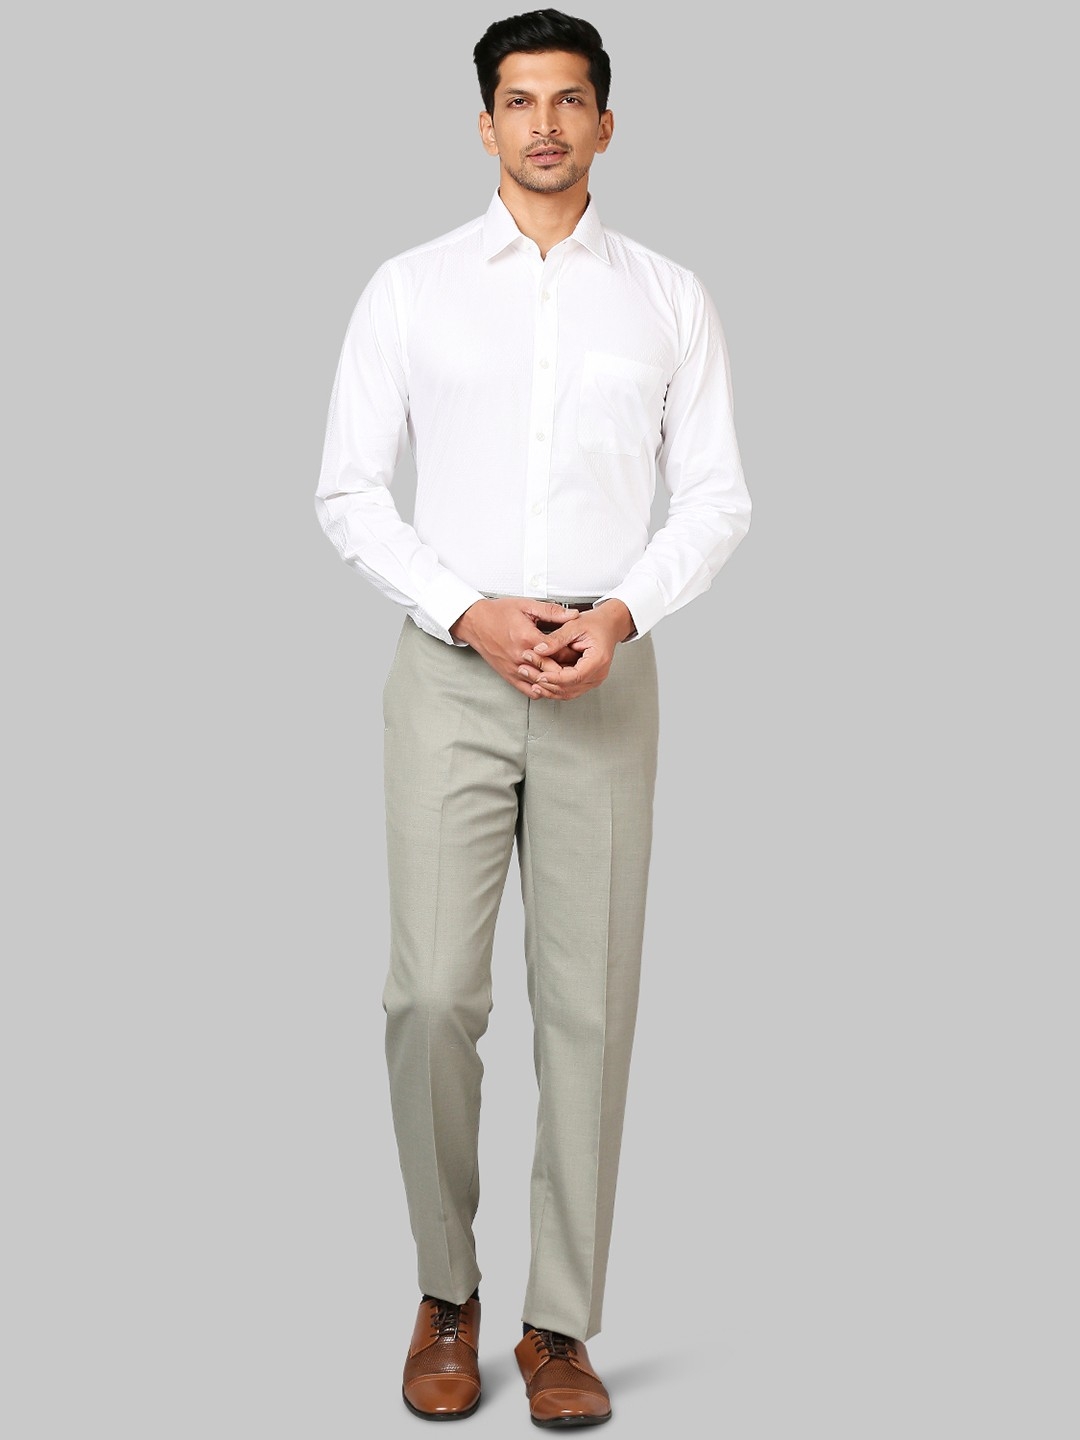 Share 77+ white shirt and khaki trousers best - in.cdgdbentre